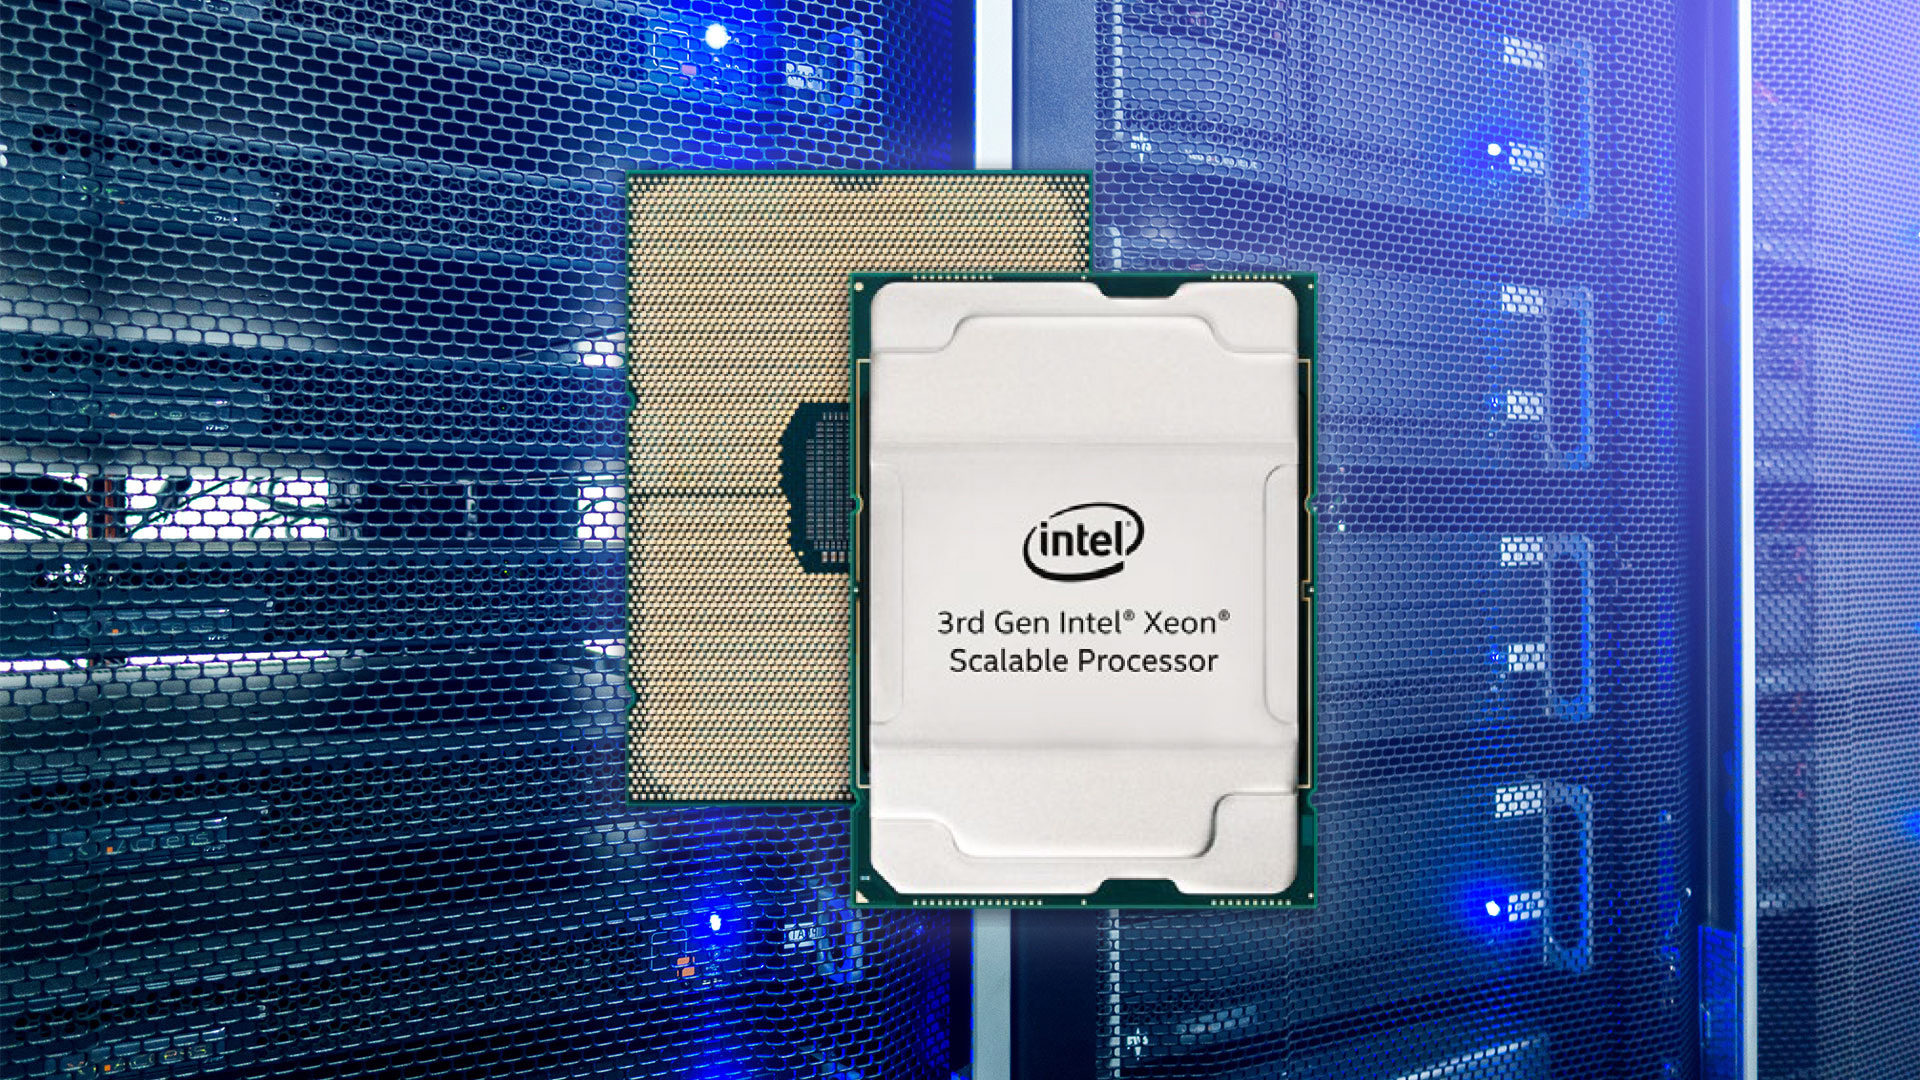 Mock up of 3rd Gen Intel Xeon Scalable chip